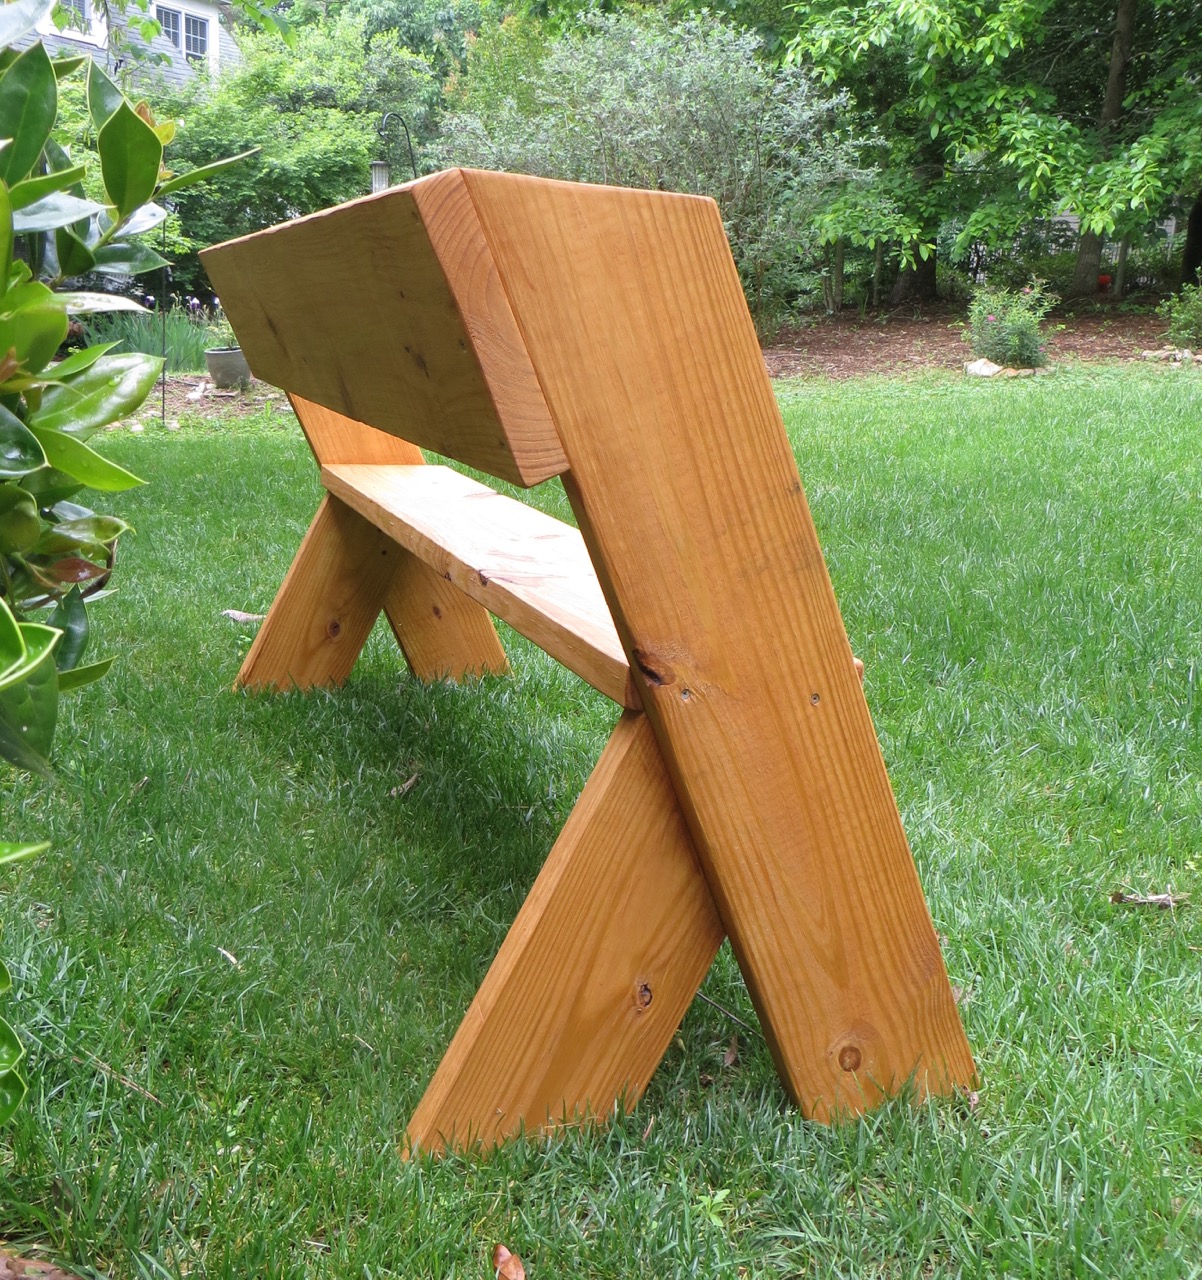 DIY Tutorial - $16 Simple Outdoor Wood Bench The Project ...